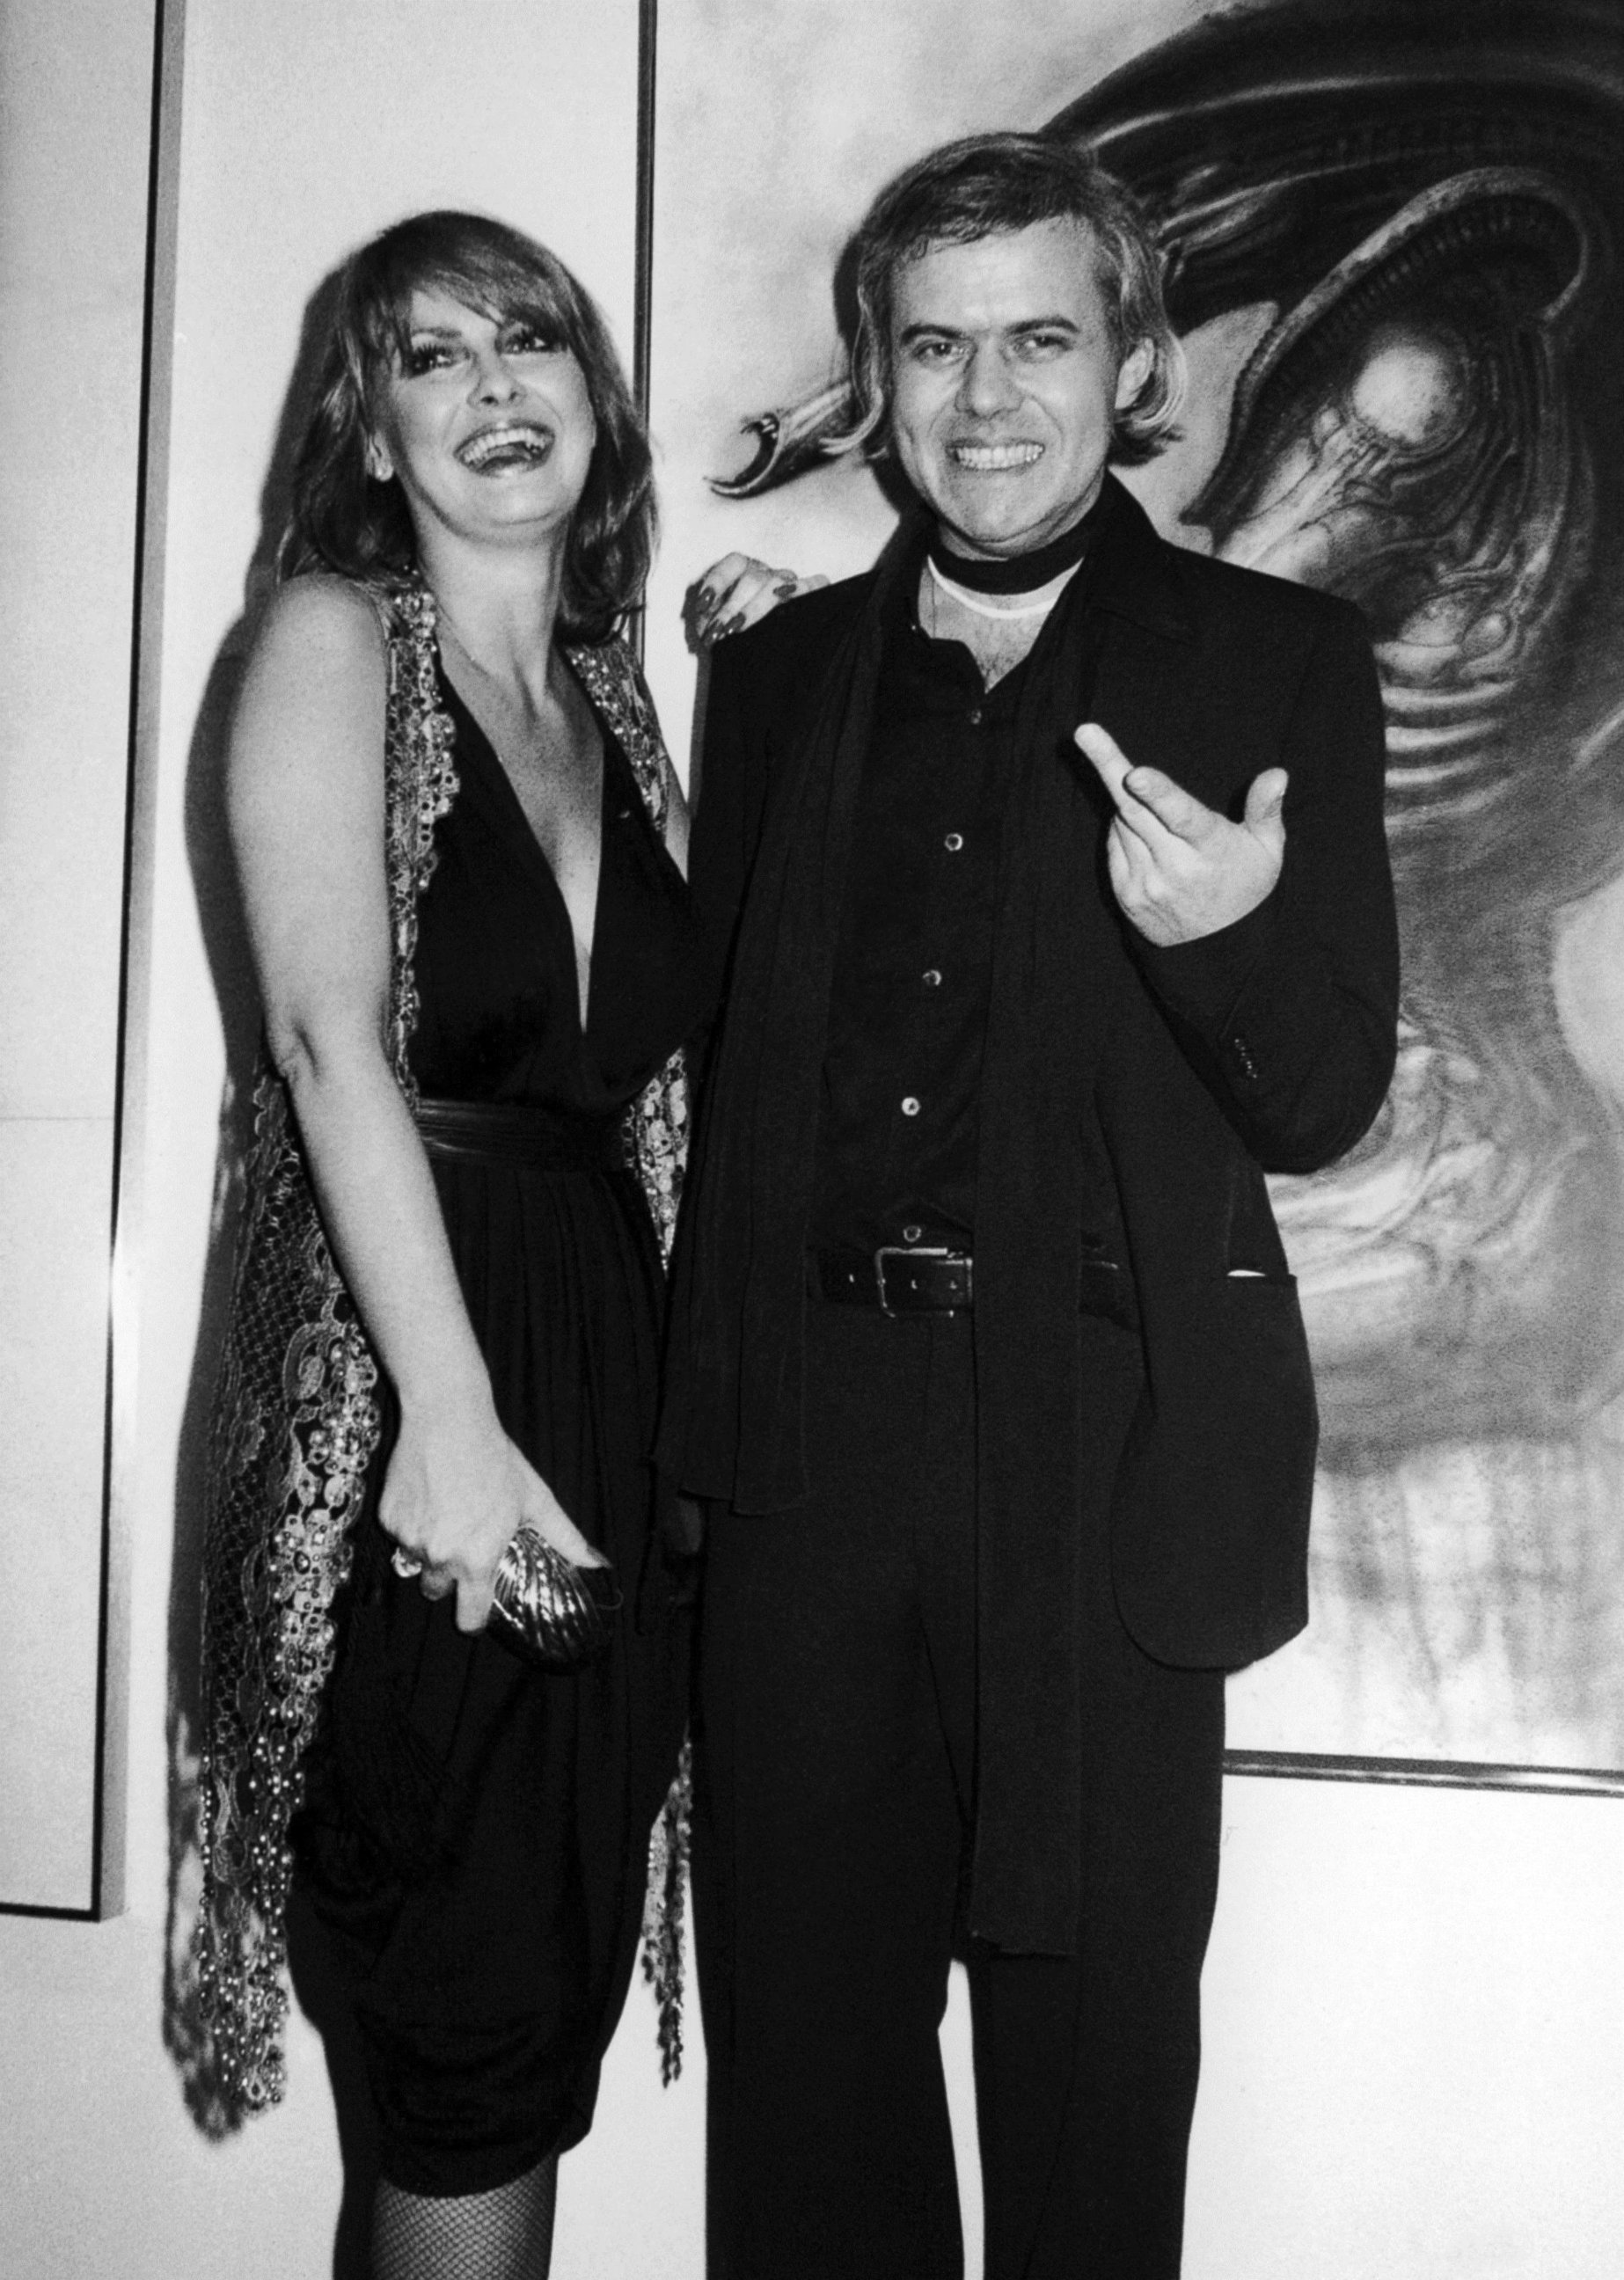 PHOTO: In this April 1980 file photo, Swiss artist H.R. Giger, right, poses with model Anneka Vasta at the opening of an exhibition in New York. 